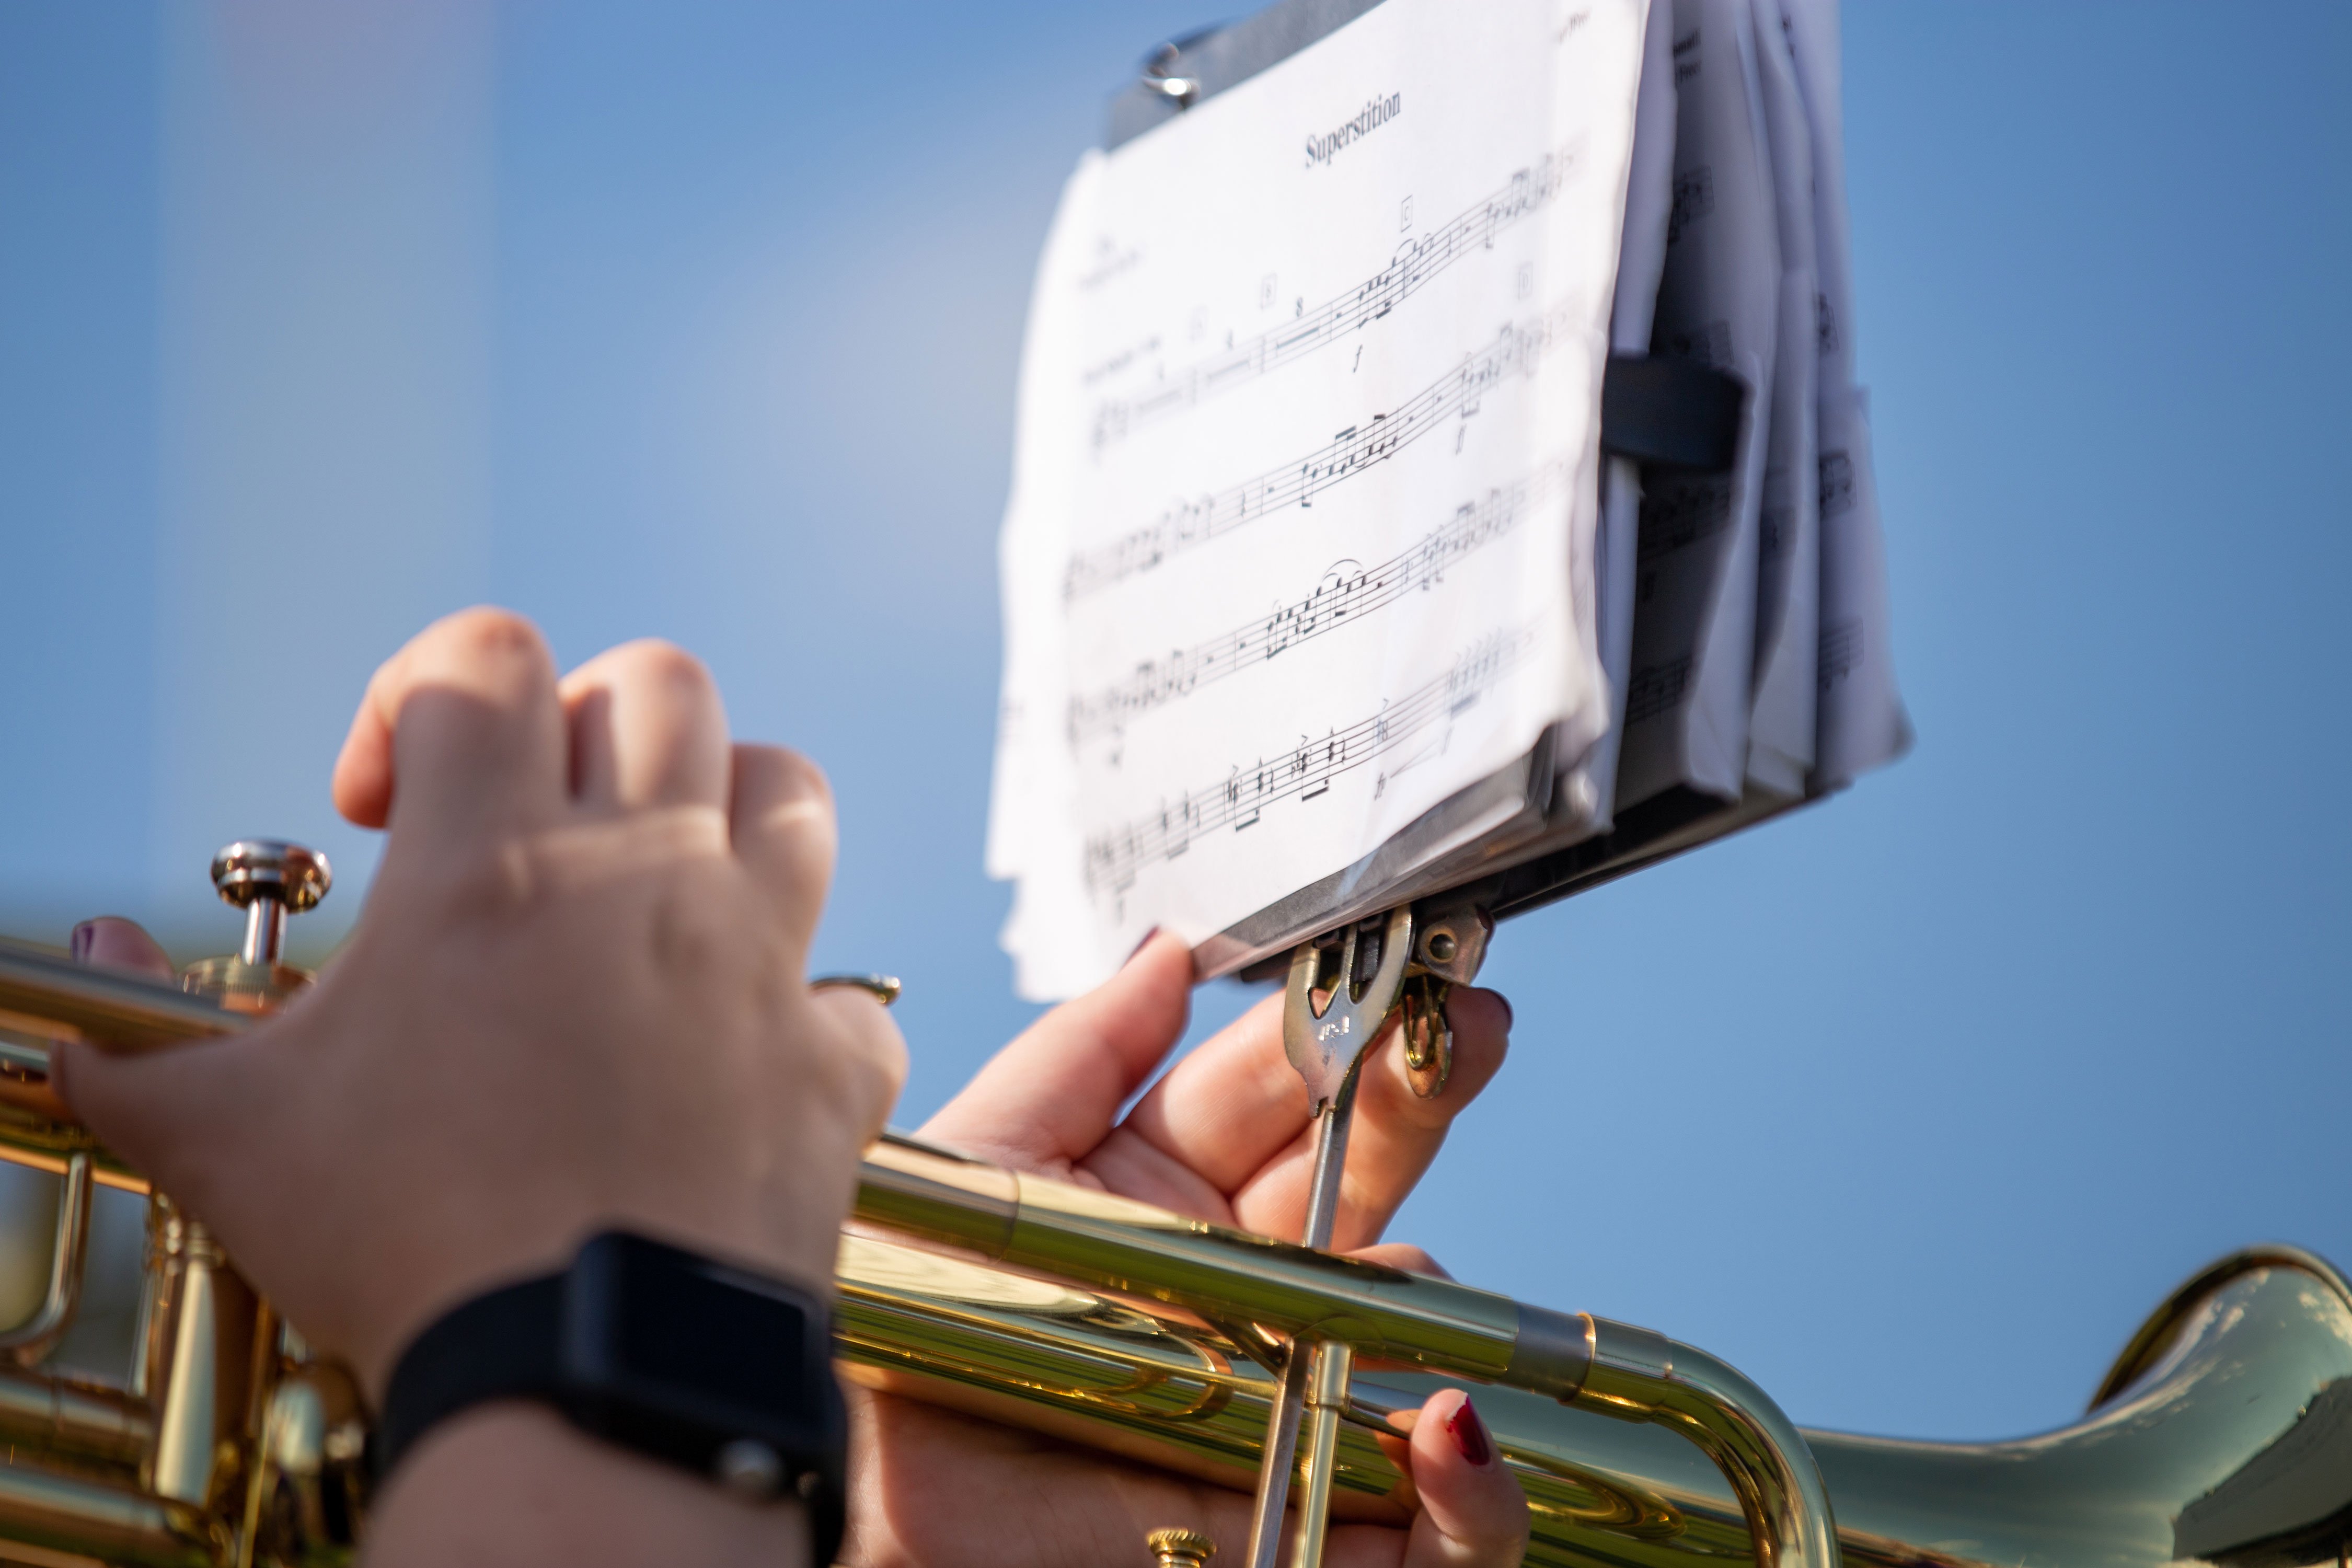 A close-up of "Superstition" sheet music mounted on a trumpet being played by a student.